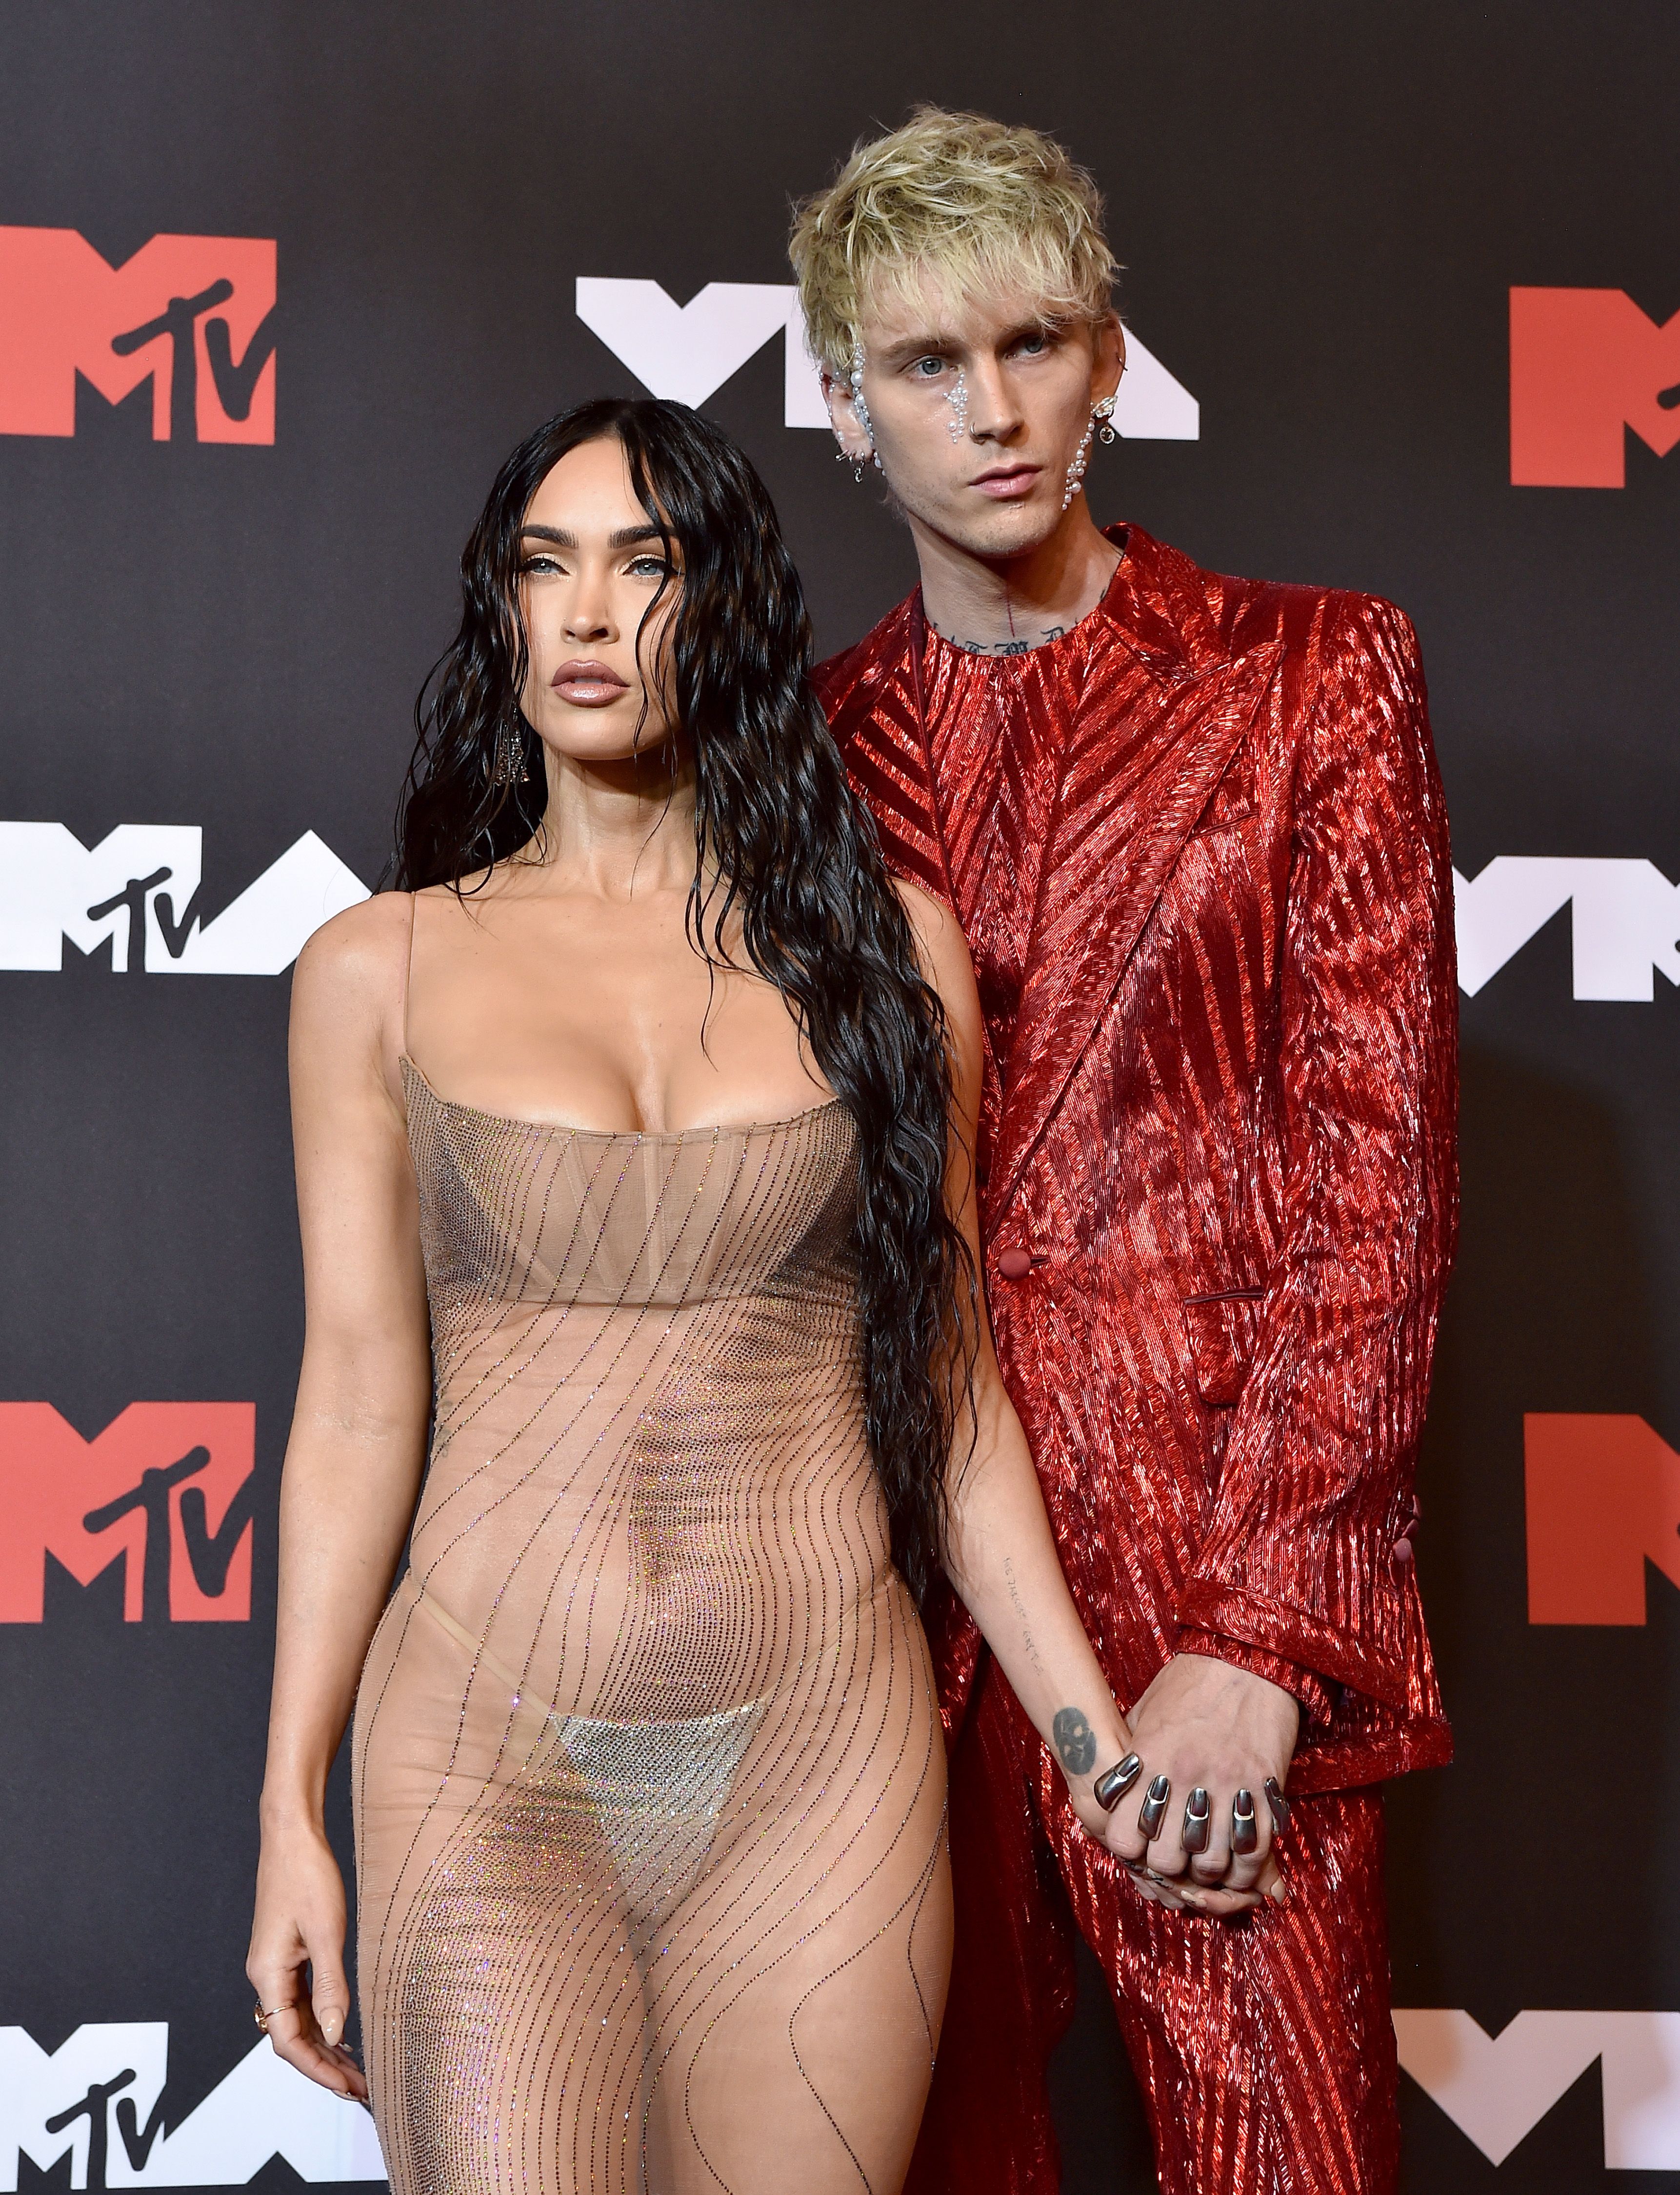 Megan Fox on the Lengths She's Gone to Support Machine Gun Kelly as a Partner After His Suicide Attempt